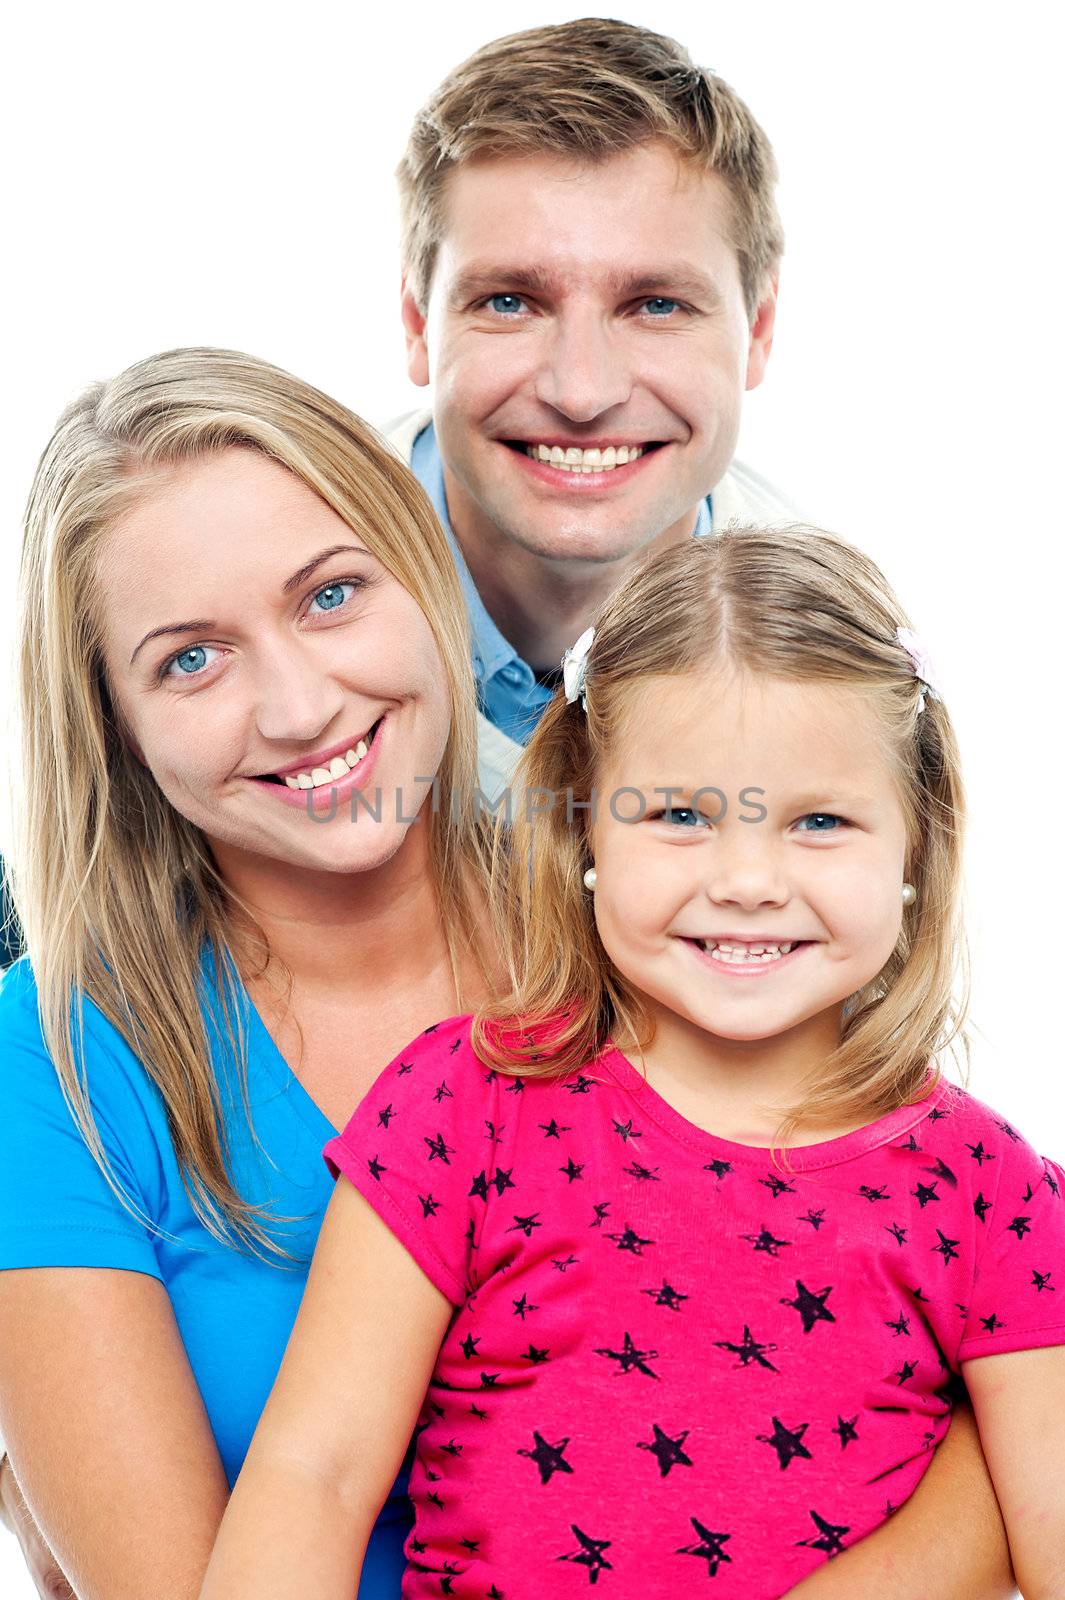 Parents posing with cute smiling daughter. Looking at camera. Over white background